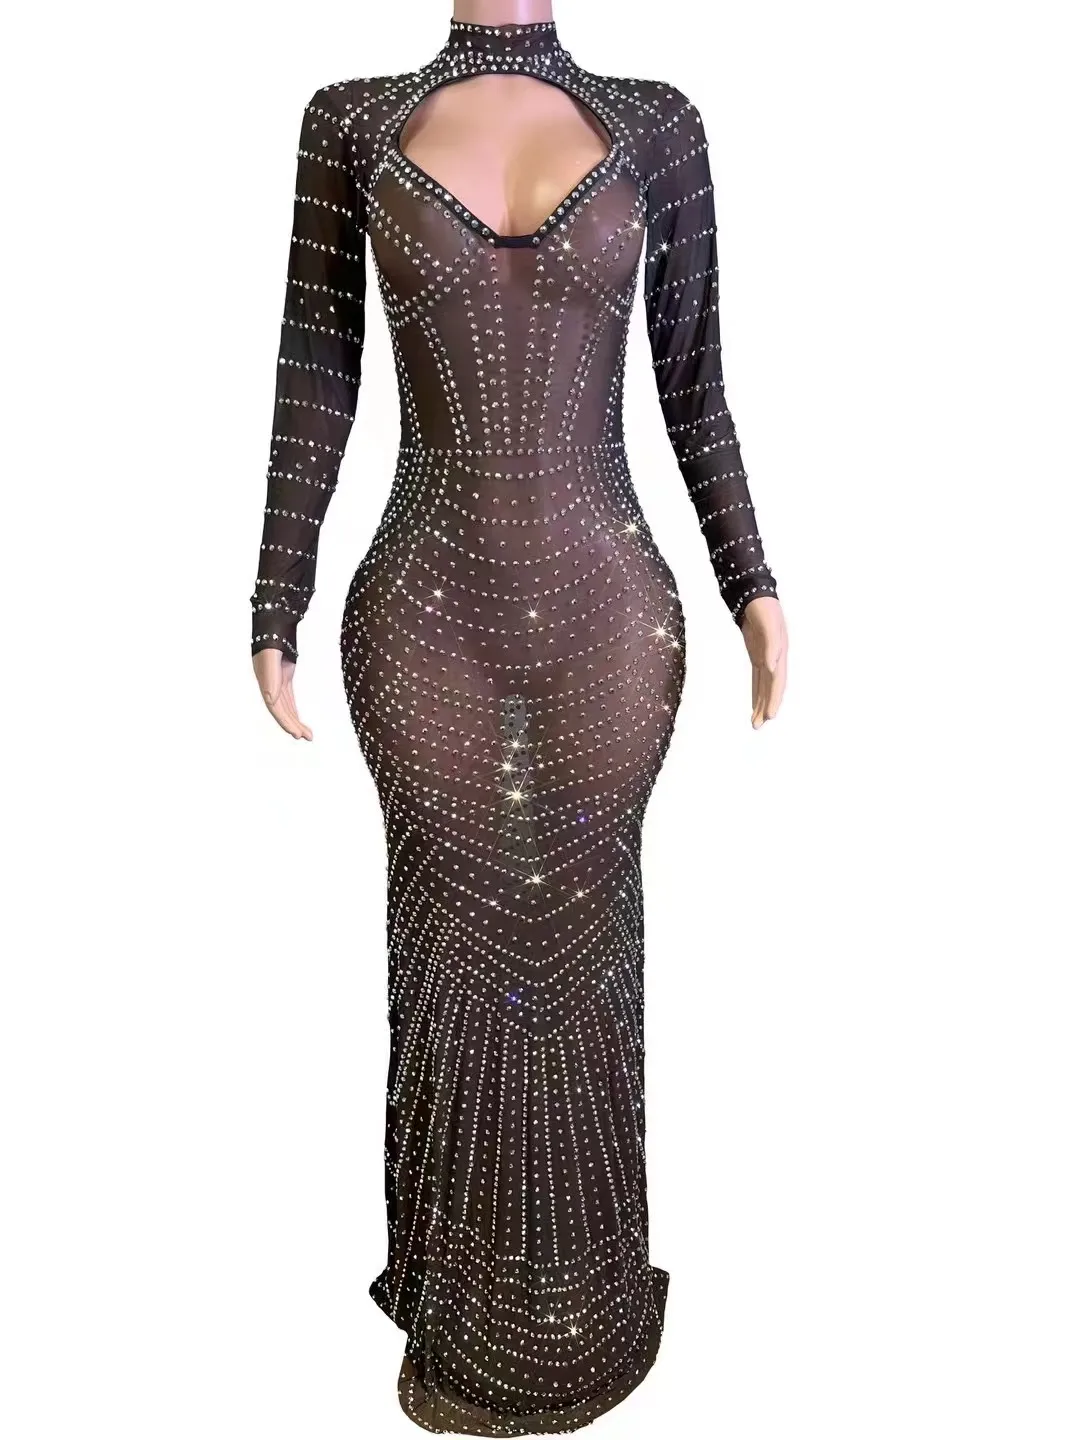 

Sexy Tight Fitting Long Women Dress See Through Mesh Party Club Night BarShow Photo Shoot Wear Singing Stage Performance Costume